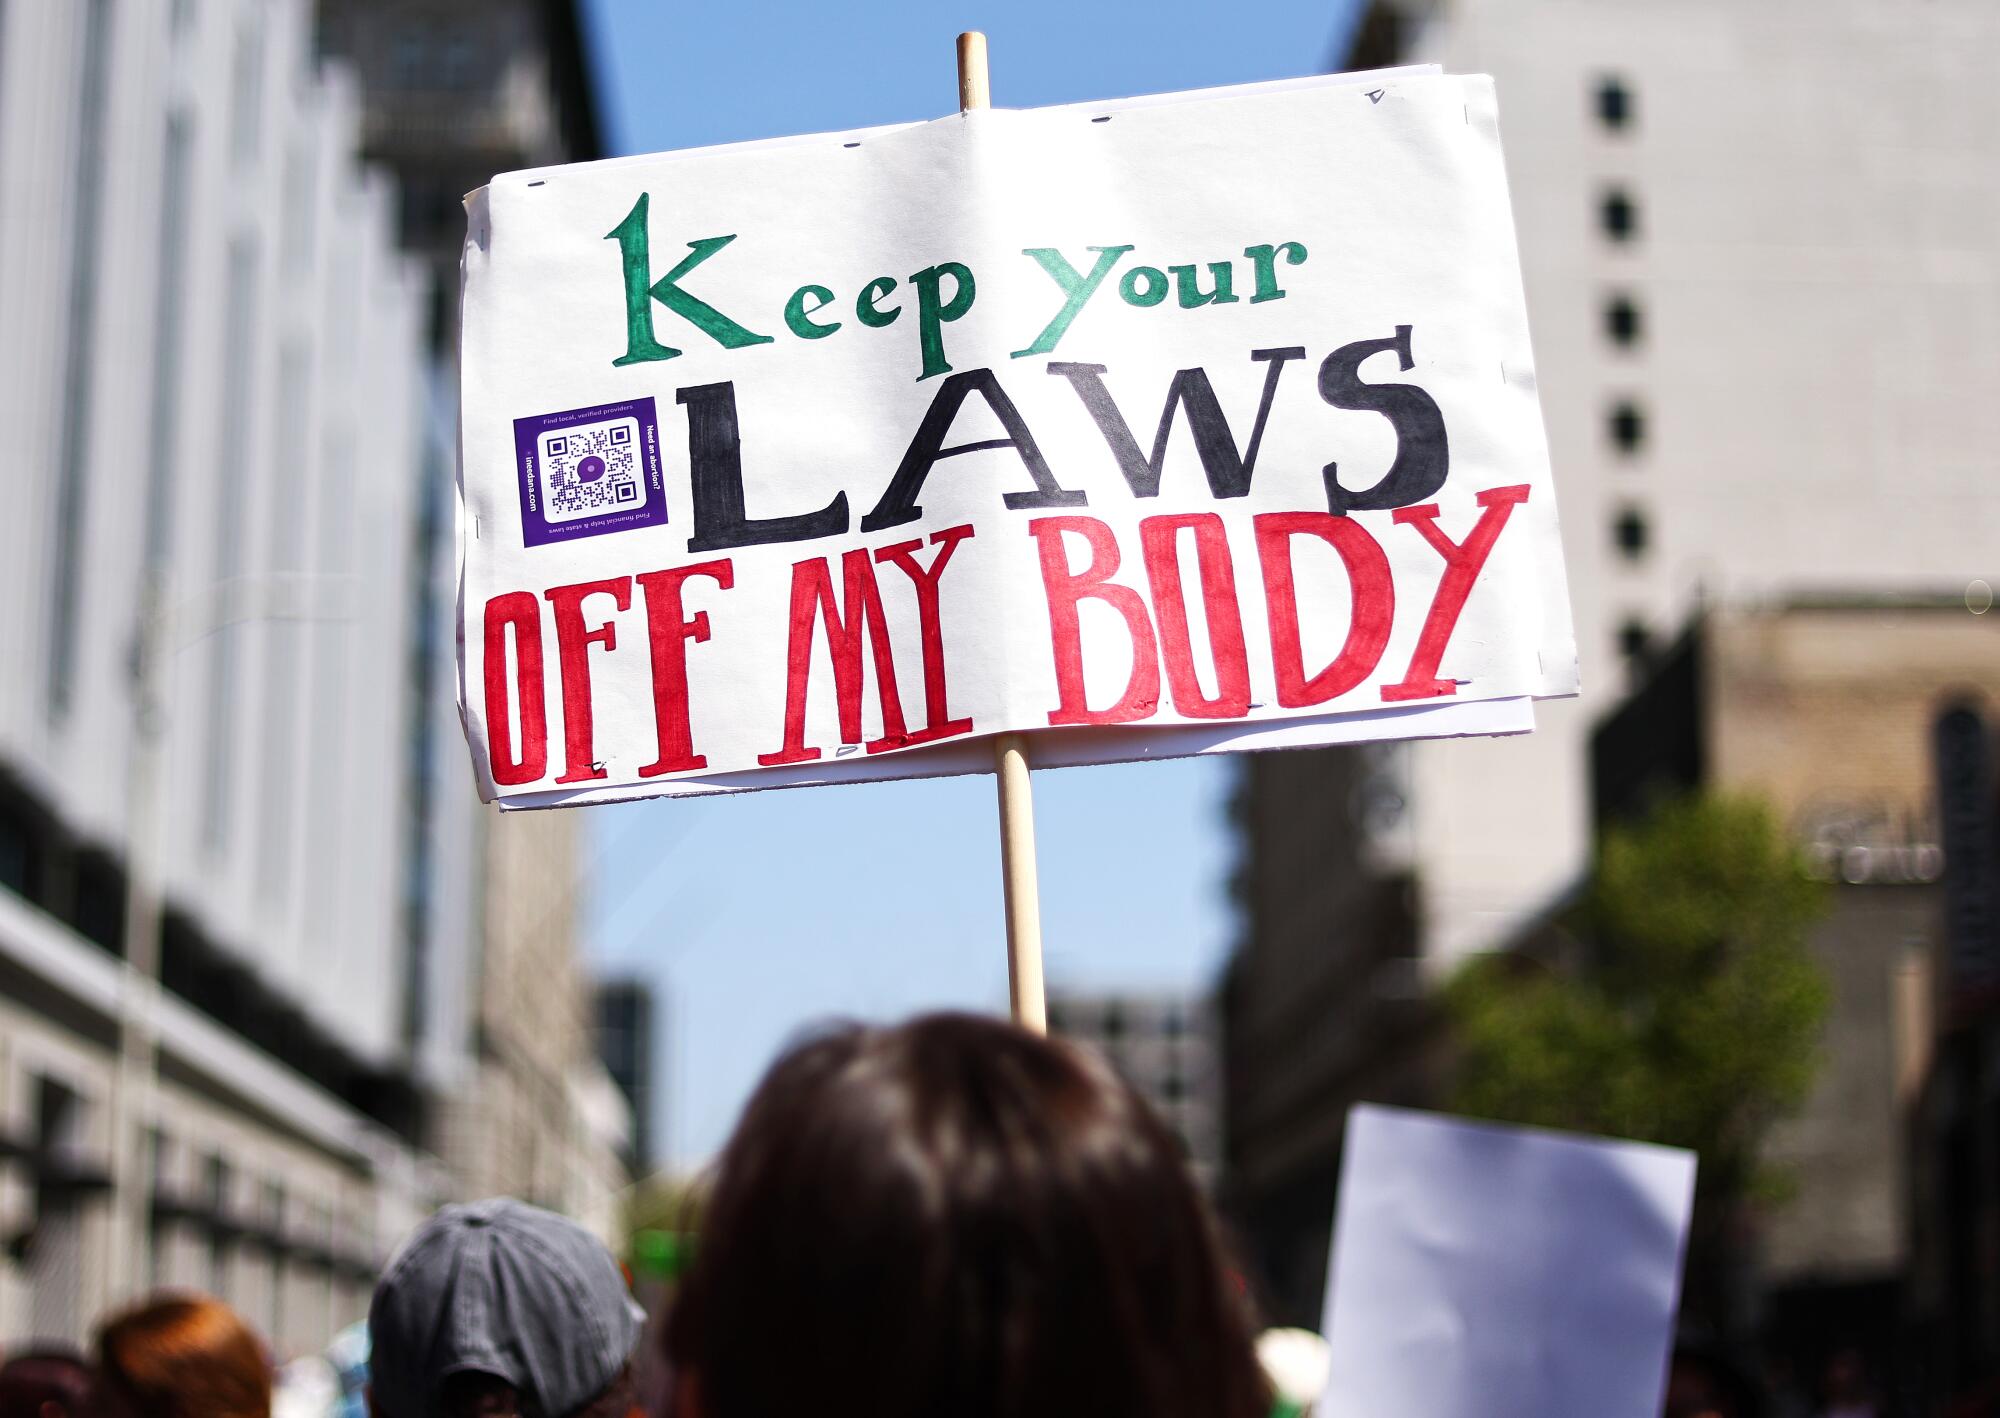 A protester holds up a sign reading "Keep your laws off my body."